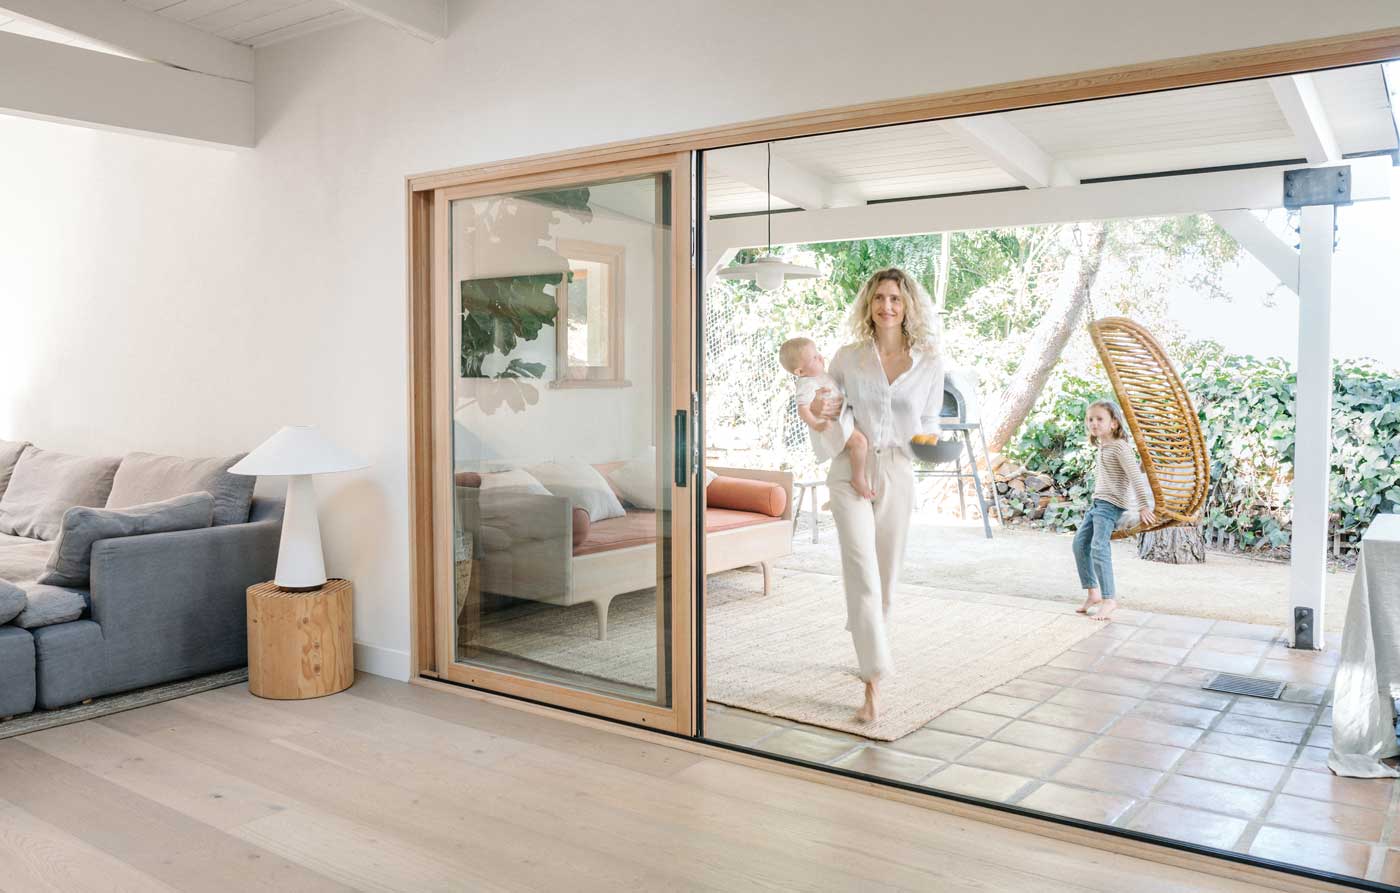 Amber Lestrange in Living Room with Marvin Ultimate Sliding Patio Door